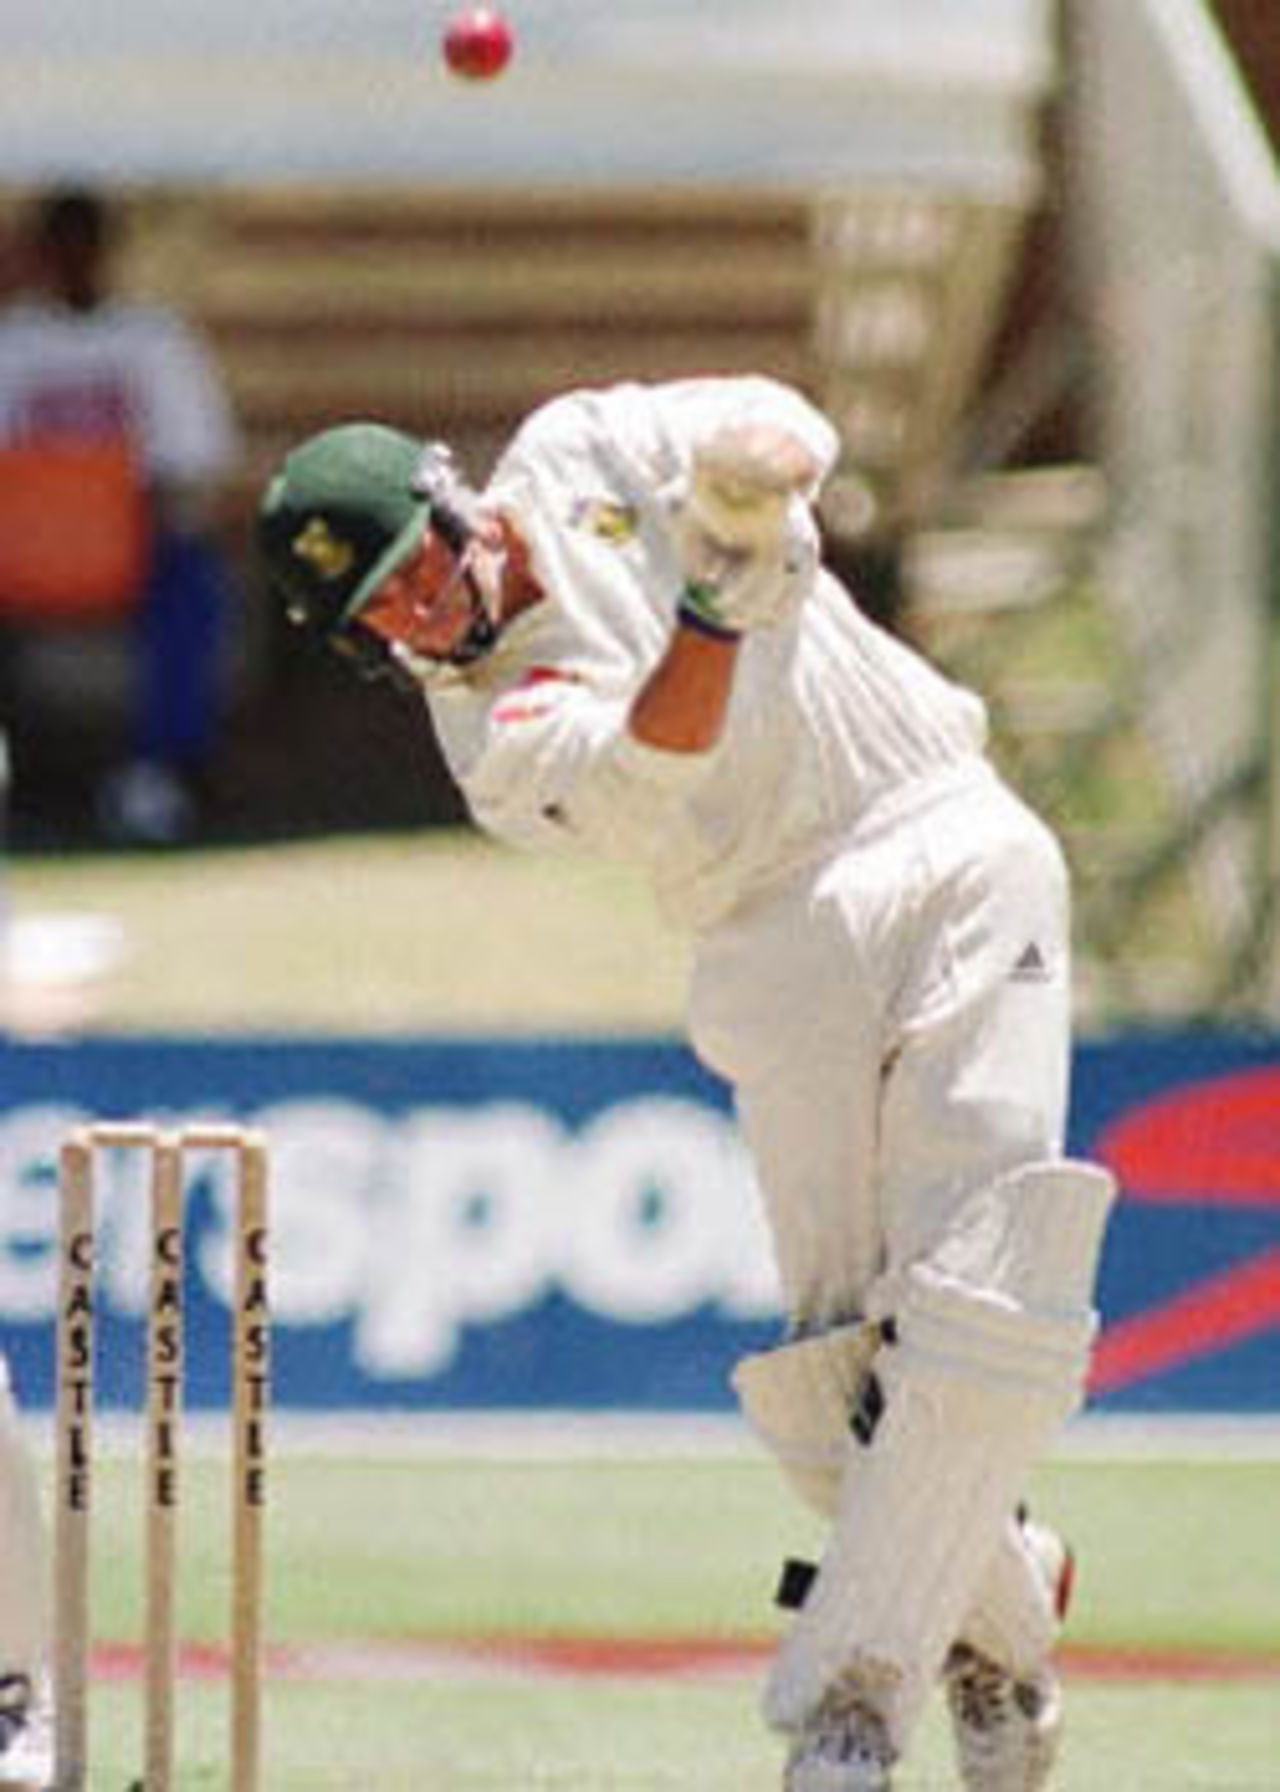 Neil McKenzie drives hard on the way to his century, New Zealand in South Africa, 2000/01, 2nd Test, South Africa v New Zealand, Crusaders Ground, St George's Park, Port Elizabeth, 30Nov-04Dec 2000 (Day 4).